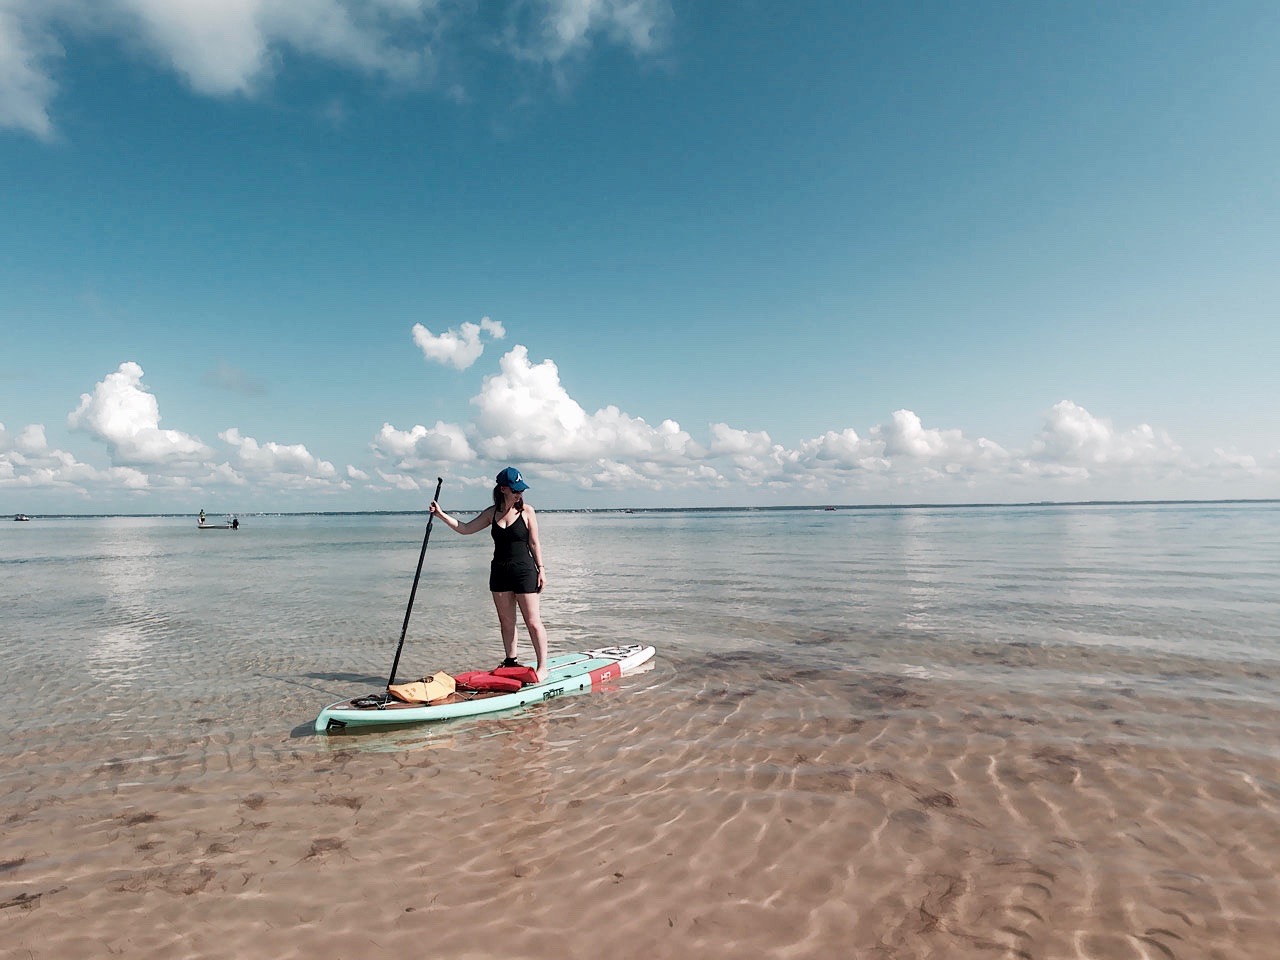 Alyssa stands on a SUP board in the Gulf of Mexico